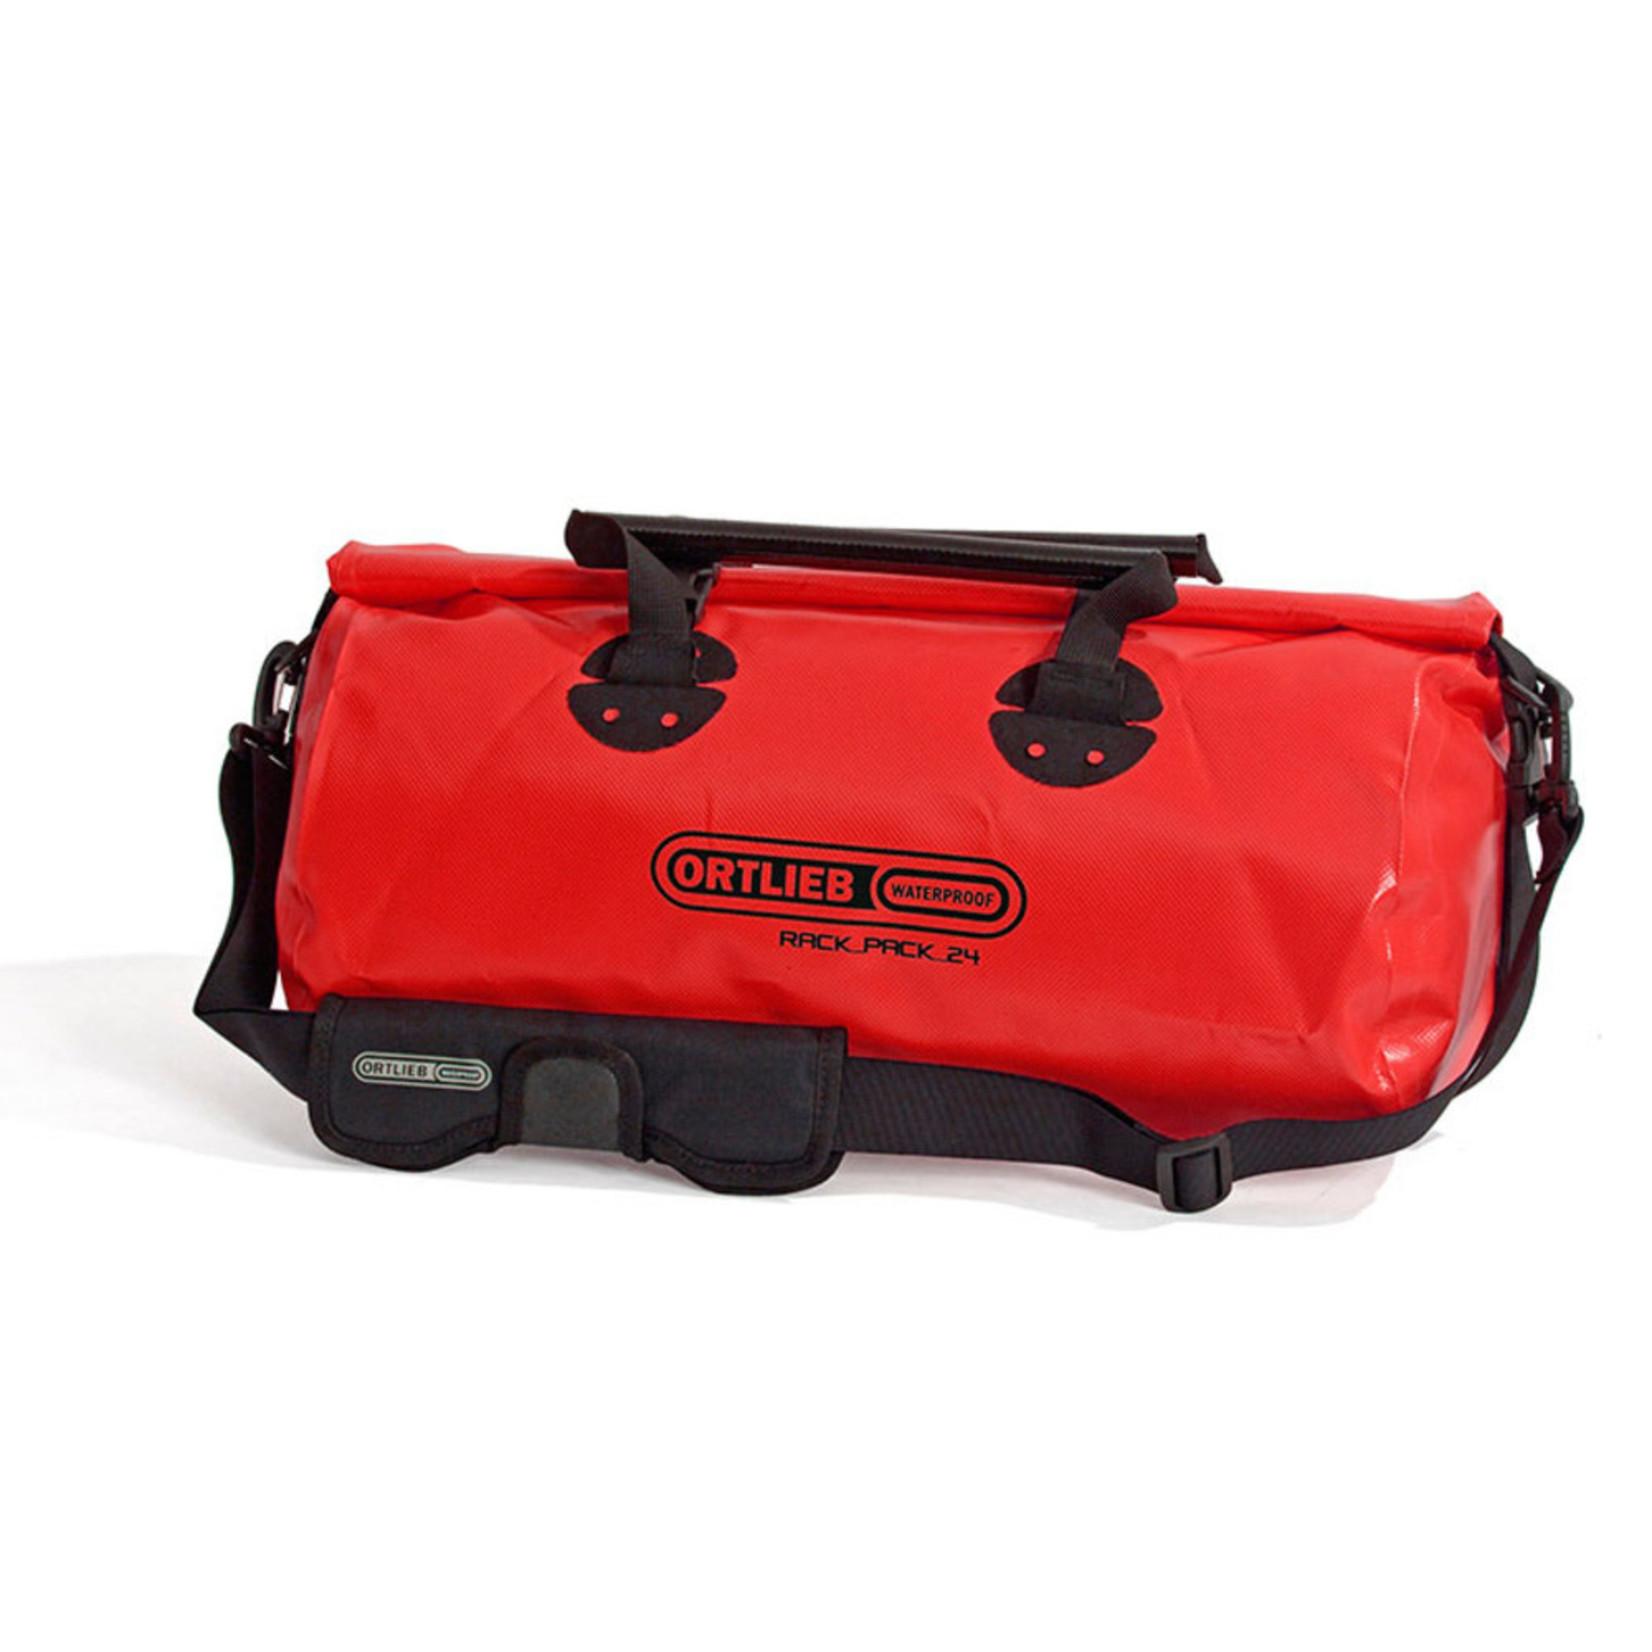 Ortlieb New Ortlieb K39 Rack-Pack Bag Small- 24L Red Water Resistant